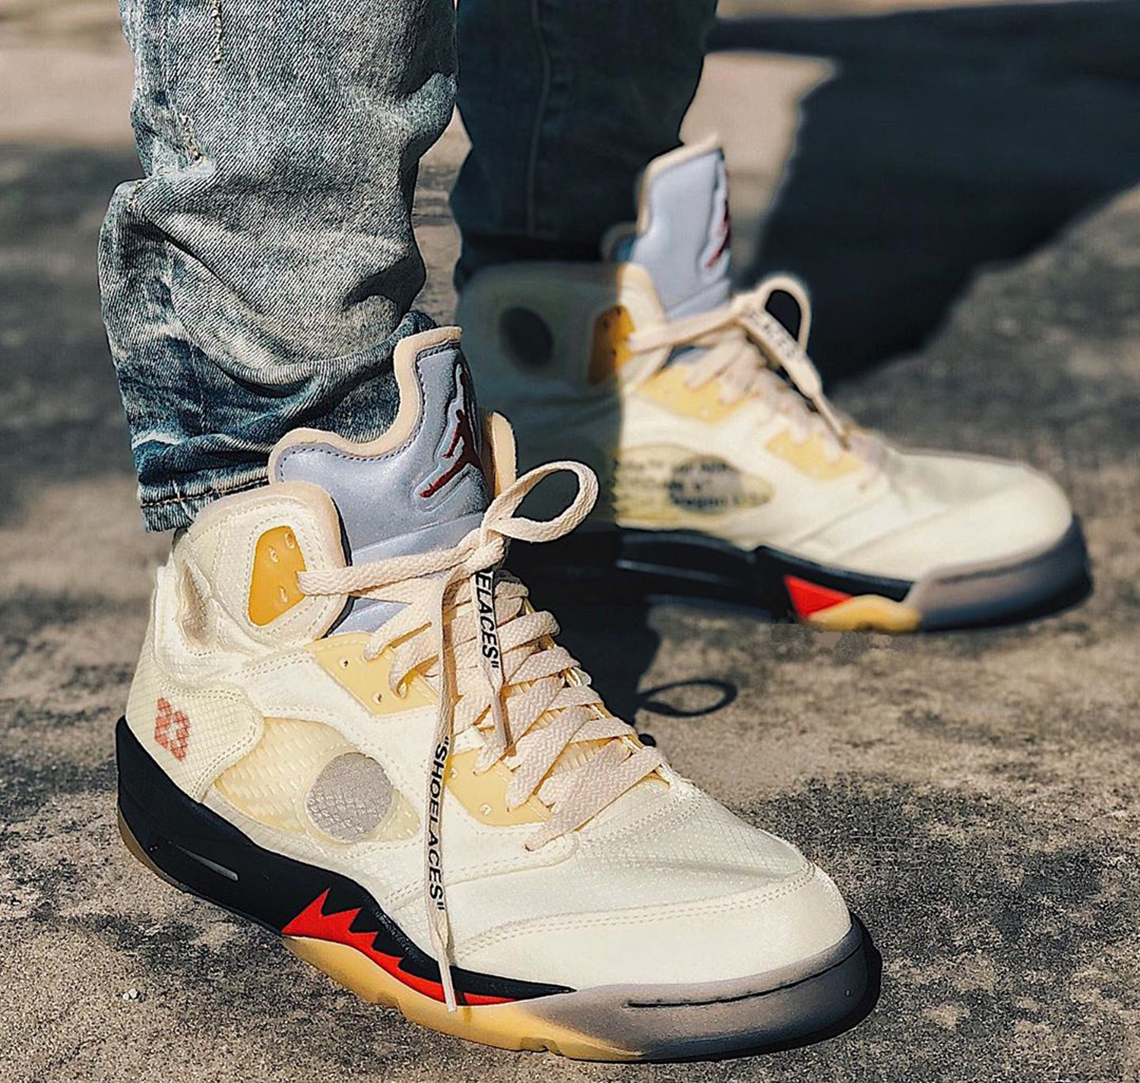 Forberedelse her Interesse Off-White Air Jordan 5 Sail DH8565-100 Release Info | SneakerNews.com